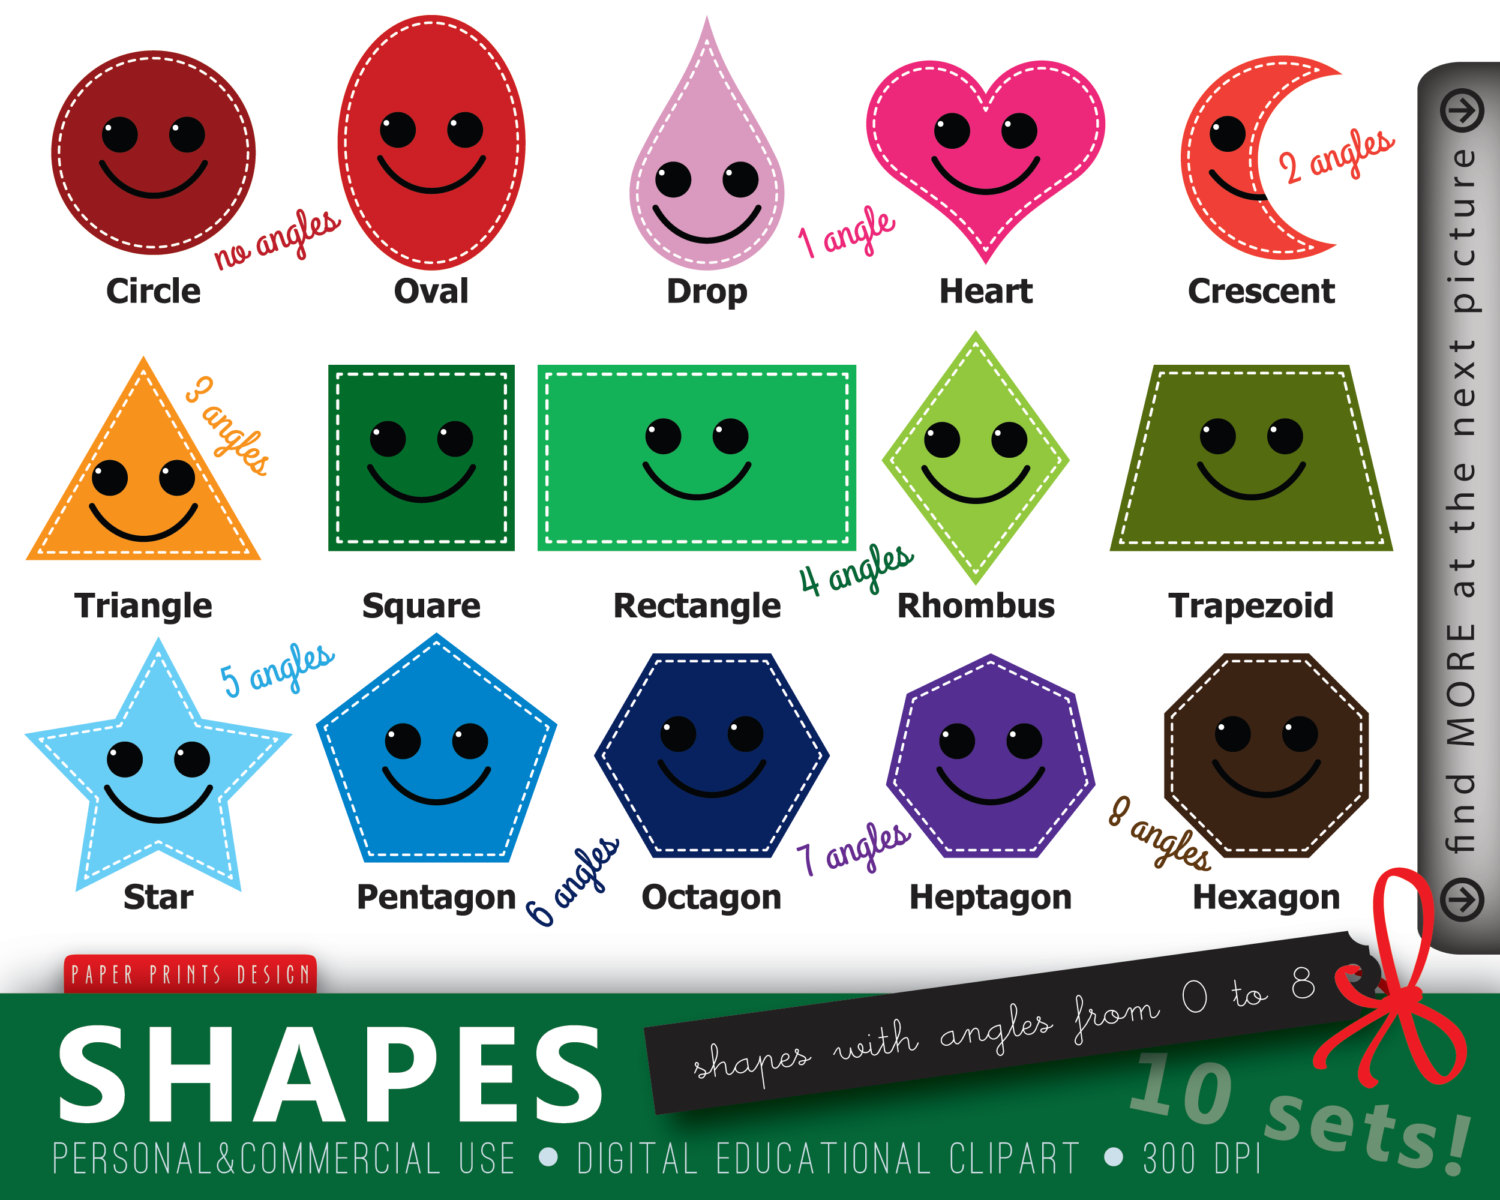 Popular items for clipart shapes on Etsy